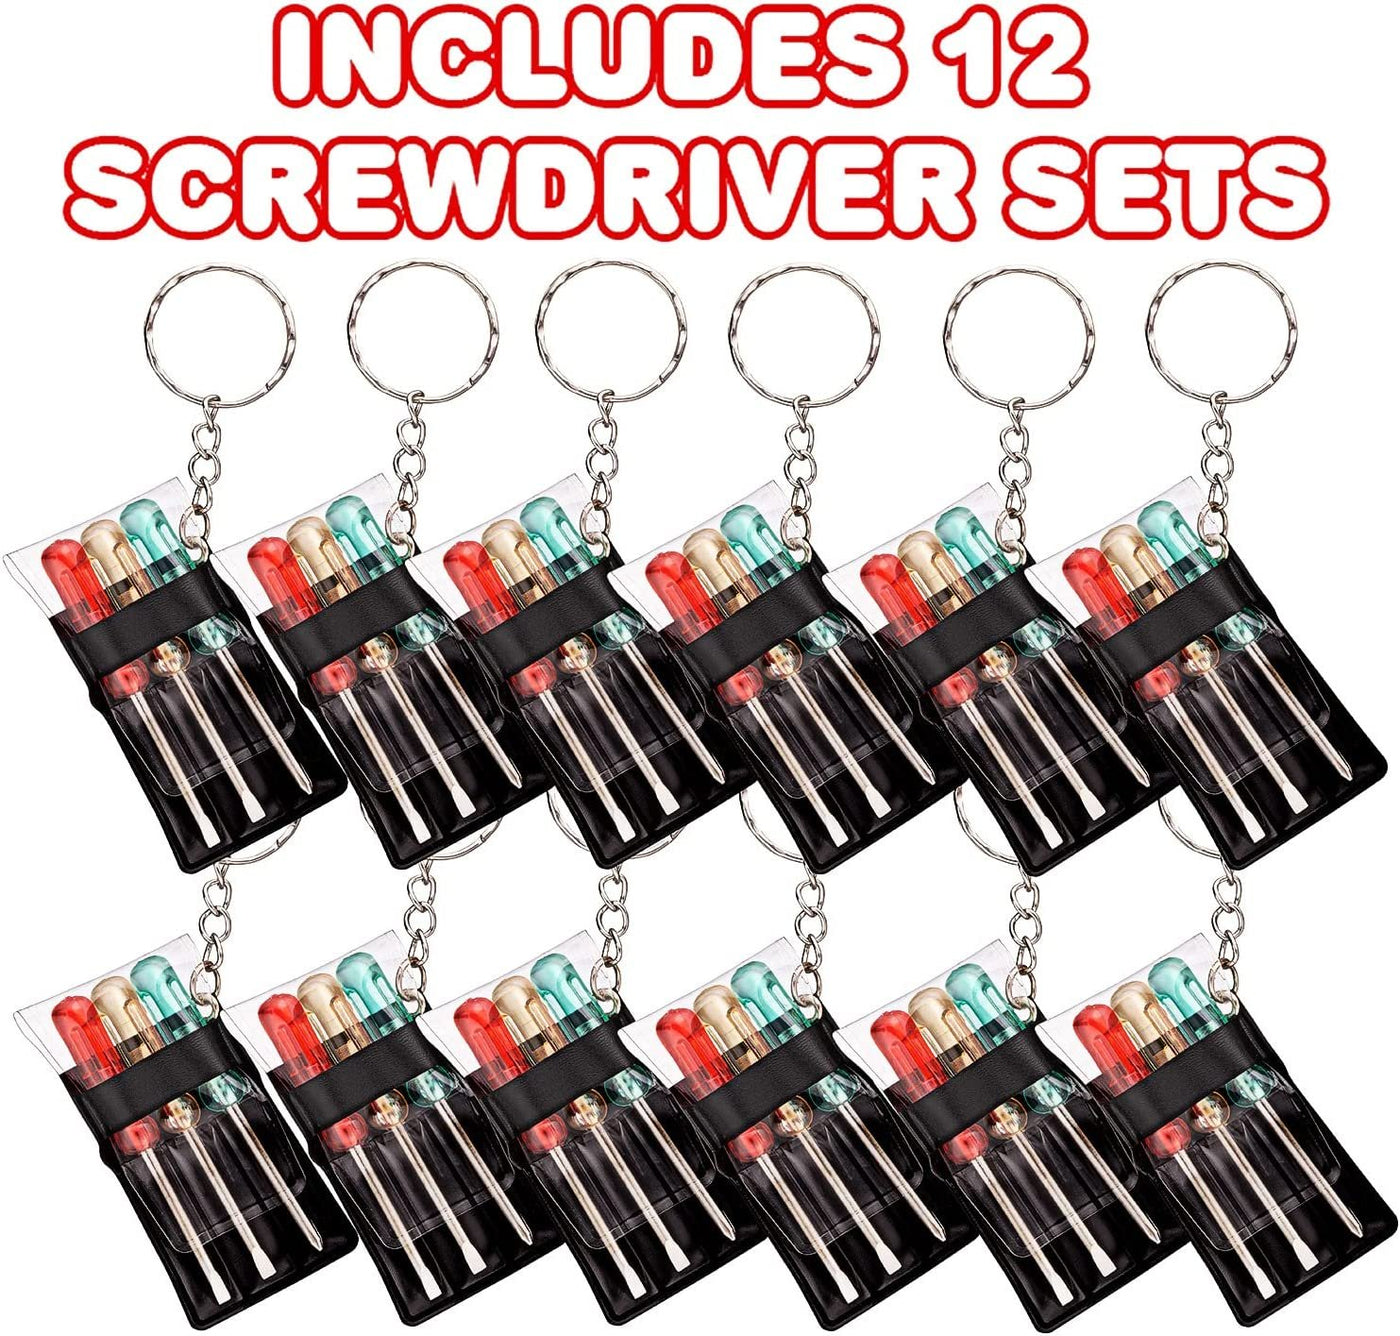 Mini Screwdriver Set with Keychain - Set of 12 - Each Set Includes 3 Screw Drivers in a Portable Pouch - Cool Party Favor - Goodie Bag Filler